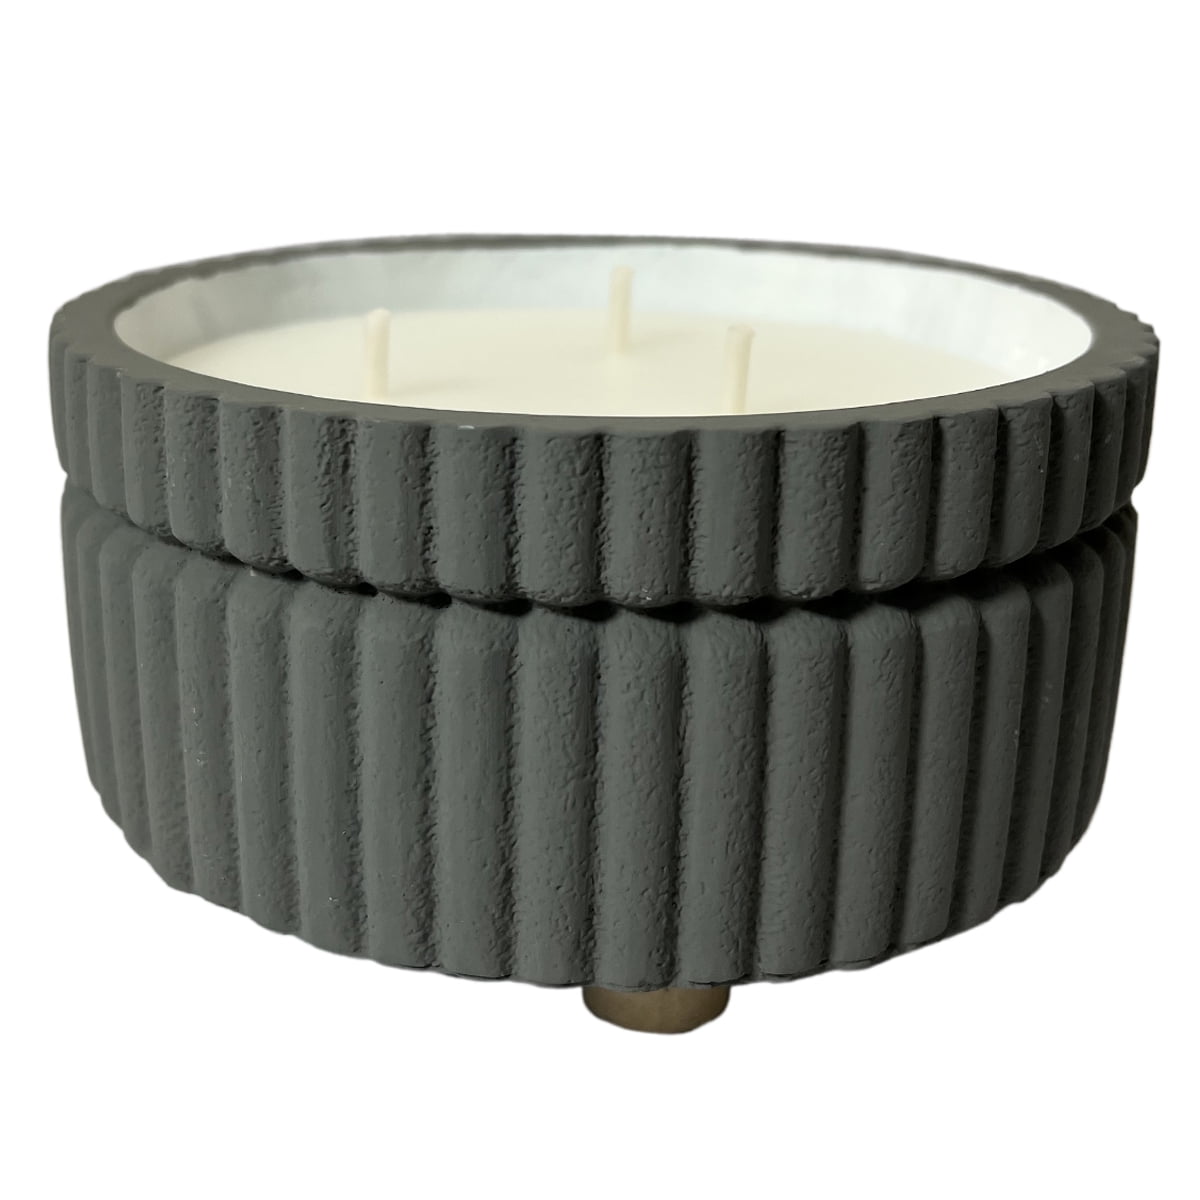 Better Homes & Gardens Citronella, Blue Lavender, and Cedar 12.4oz Scented Candle, Gray